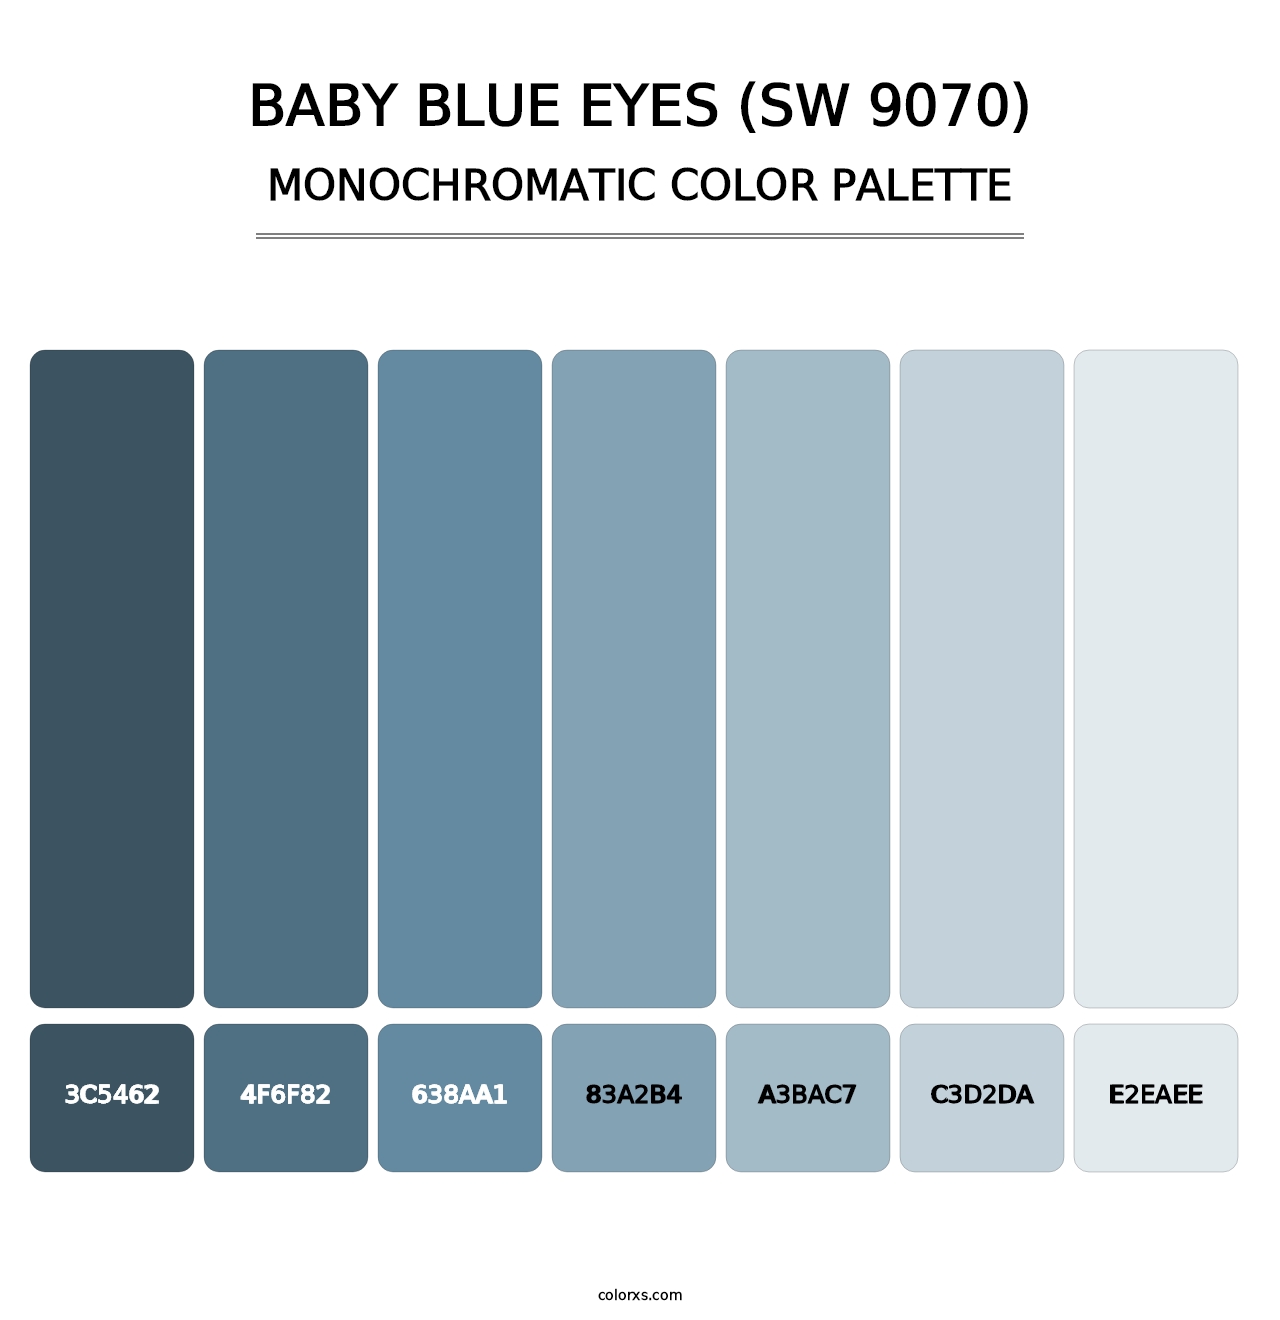 Baby Blue Eyes (SW 9070) - Monochromatic Color Palette